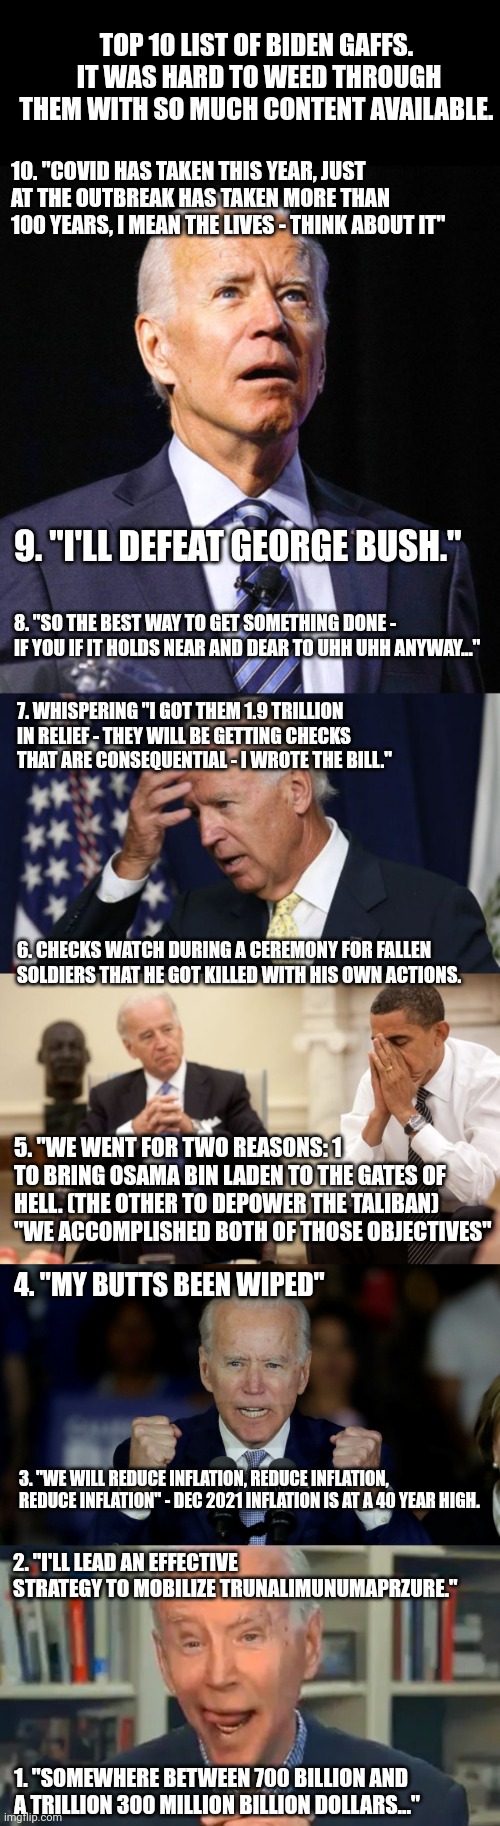 Top 10 Biden Gaffs I can recall over the last couple years. | TOP 10 LIST OF BIDEN GAFFS.  IT WAS HARD TO WEED THROUGH THEM WITH SO MUCH CONTENT AVAILABLE. 10. "COVID HAS TAKEN THIS YEAR, JUST AT THE OUTBREAK HAS TAKEN MORE THAN 100 YEARS, I MEAN THE LIVES - THINK ABOUT IT"; 9. "I'LL DEFEAT GEORGE BUSH."; 8. "SO THE BEST WAY TO GET SOMETHING DONE - IF YOU IF IT HOLDS NEAR AND DEAR TO UHH UHH ANYWAY..."; 7. WHISPERING "I GOT THEM 1.9 TRILLION IN RELIEF - THEY WILL BE GETTING CHECKS THAT ARE CONSEQUENTIAL - I WROTE THE BILL."; 6. CHECKS WATCH DURING A CEREMONY FOR FALLEN SOLDIERS THAT HE GOT KILLED WITH HIS OWN ACTIONS. 5. "WE WENT FOR TWO REASONS: 1 TO BRING OSAMA BIN LADEN TO THE GATES OF HELL. (THE OTHER TO DEPOWER THE TALIBAN) "WE ACCOMPLISHED BOTH OF THOSE OBJECTIVES"; 4. "MY BUTTS BEEN WIPED"; 3. "WE WILL REDUCE INFLATION, REDUCE INFLATION, REDUCE INFLATION" - DEC 2021 INFLATION IS AT A 40 YEAR HIGH. 2. "I'LL LEAD AN EFFECTIVE STRATEGY TO MOBILIZE TRUNALIMUNUMAPRZURE."; 1. "SOMEWHERE BETWEEN 700 BILLION AND A TRILLION 300 MILLION BILLION DOLLARS..." | image tagged in joe biden,joe biden worries,biden obama,angry joe biden,frail old biden drools | made w/ Imgflip meme maker